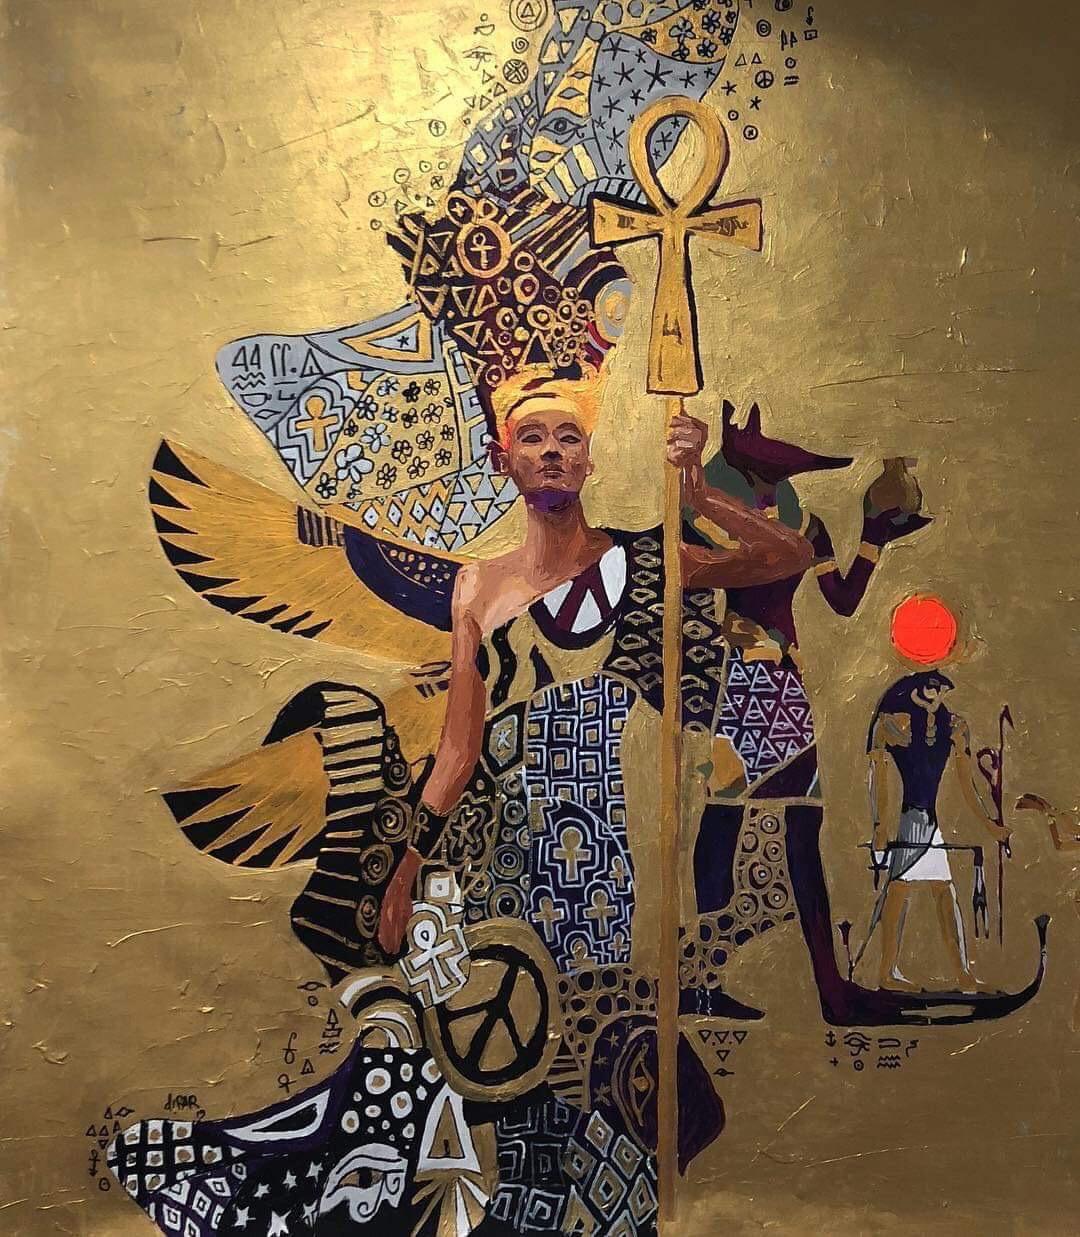 "The Golden World"  
from Nefertiti - The Golden Queen series, 2019 
51” x 43” inch
130 x 109 cm

* * * NEFERTITI * * * 
“Nefertiti” is a major solo exhibition by one of the most respected figurative painters in Egypt, Hossam Dirar. 
The show